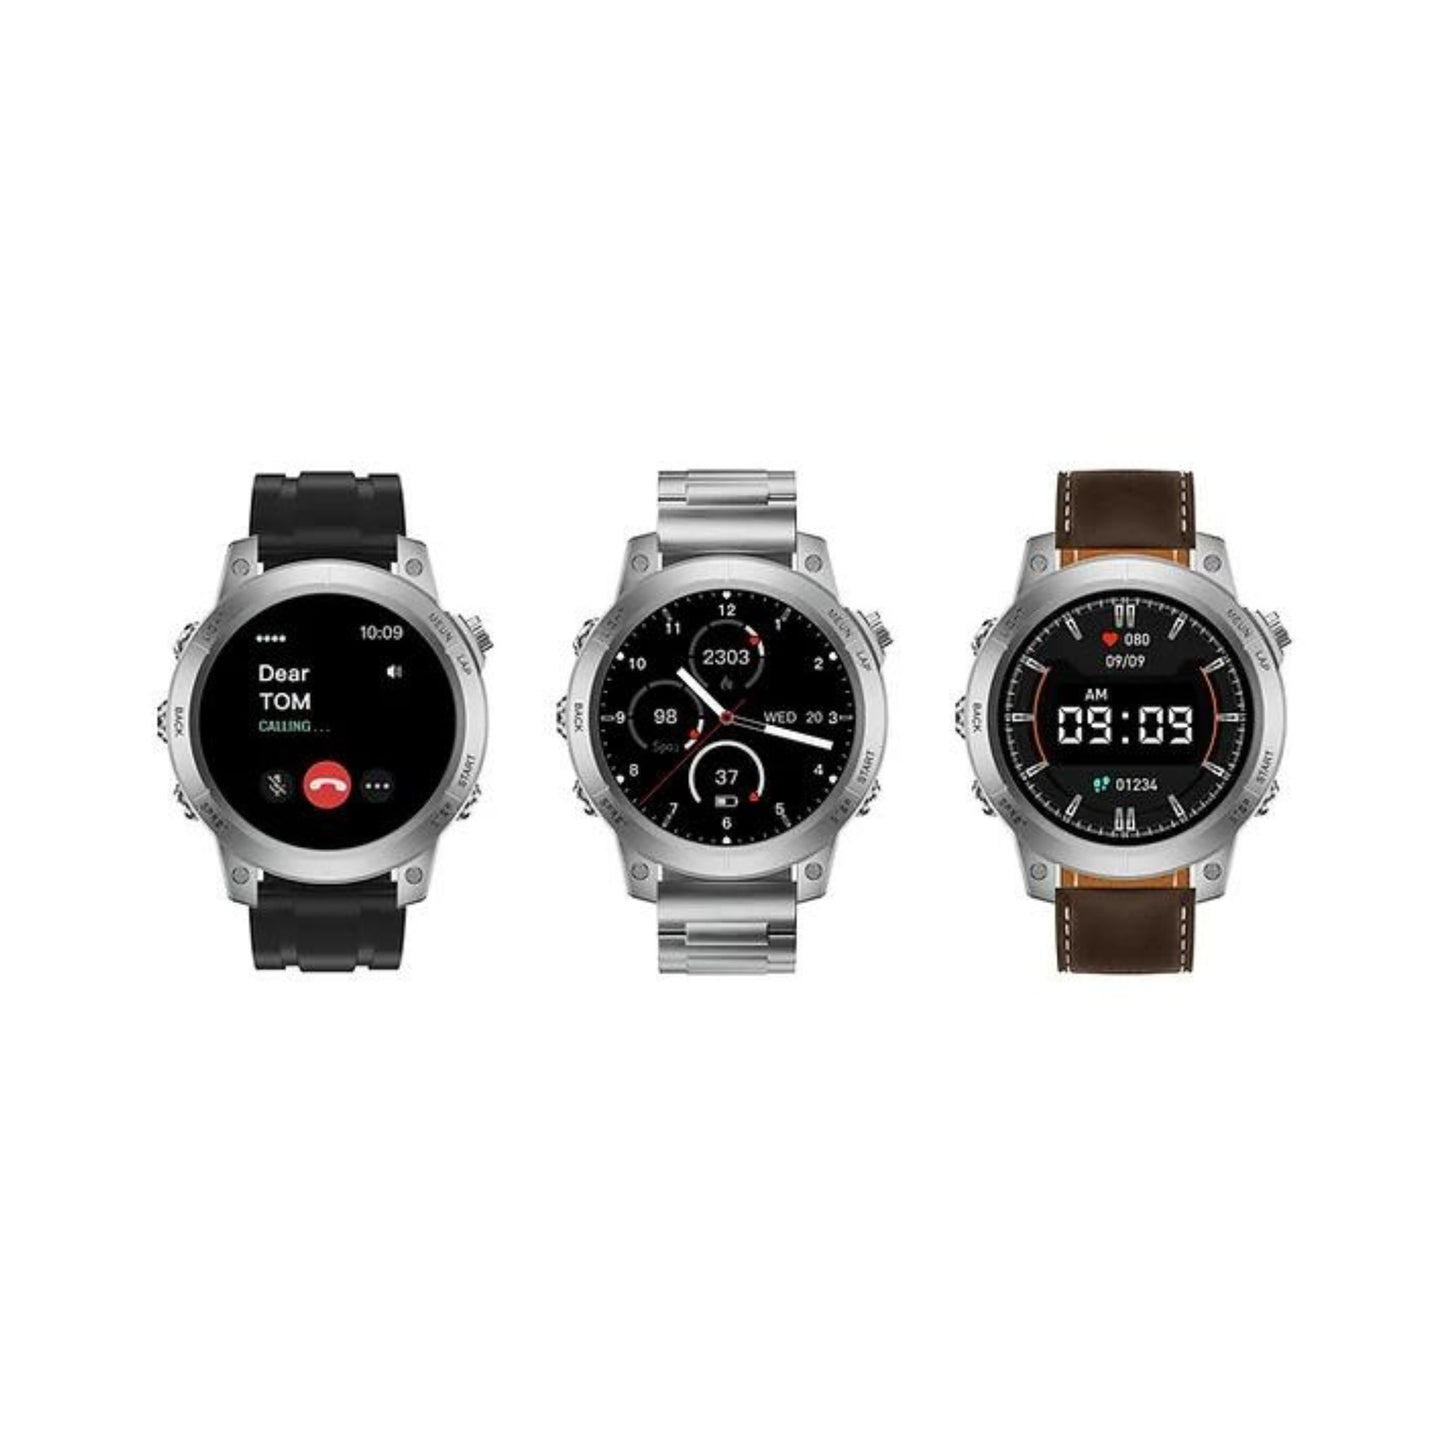 Haino Teko Germany RW-46 Amolded Display_3 Pairs Strap(Silicone,Leather,Stainless Steel__Silver